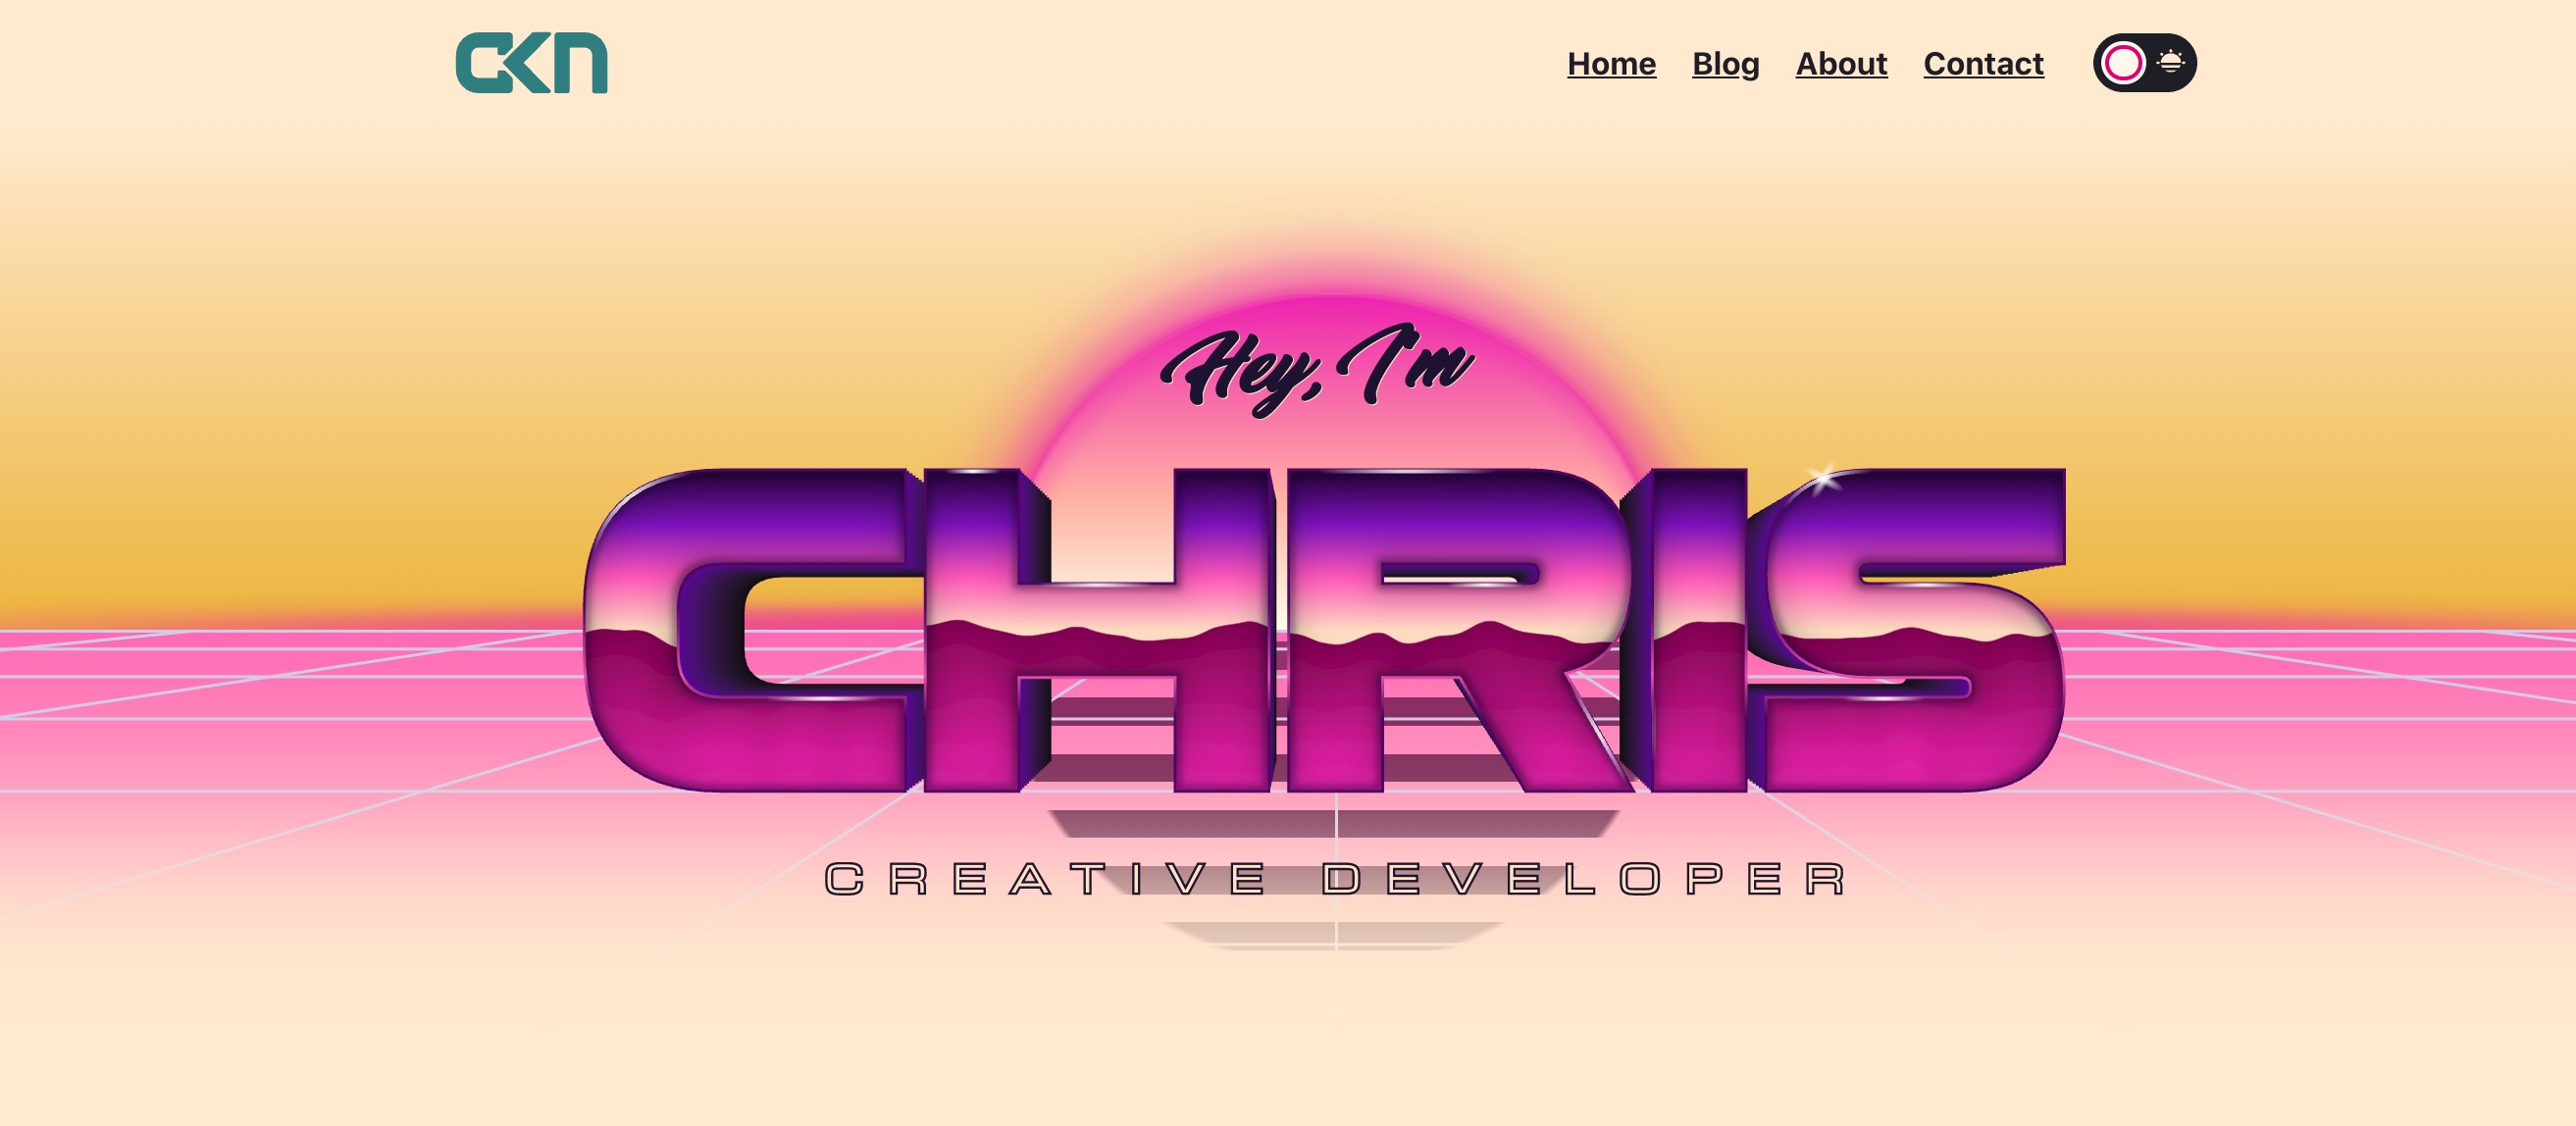 An extremely 80s homepage with Chris in huge, shiny letters